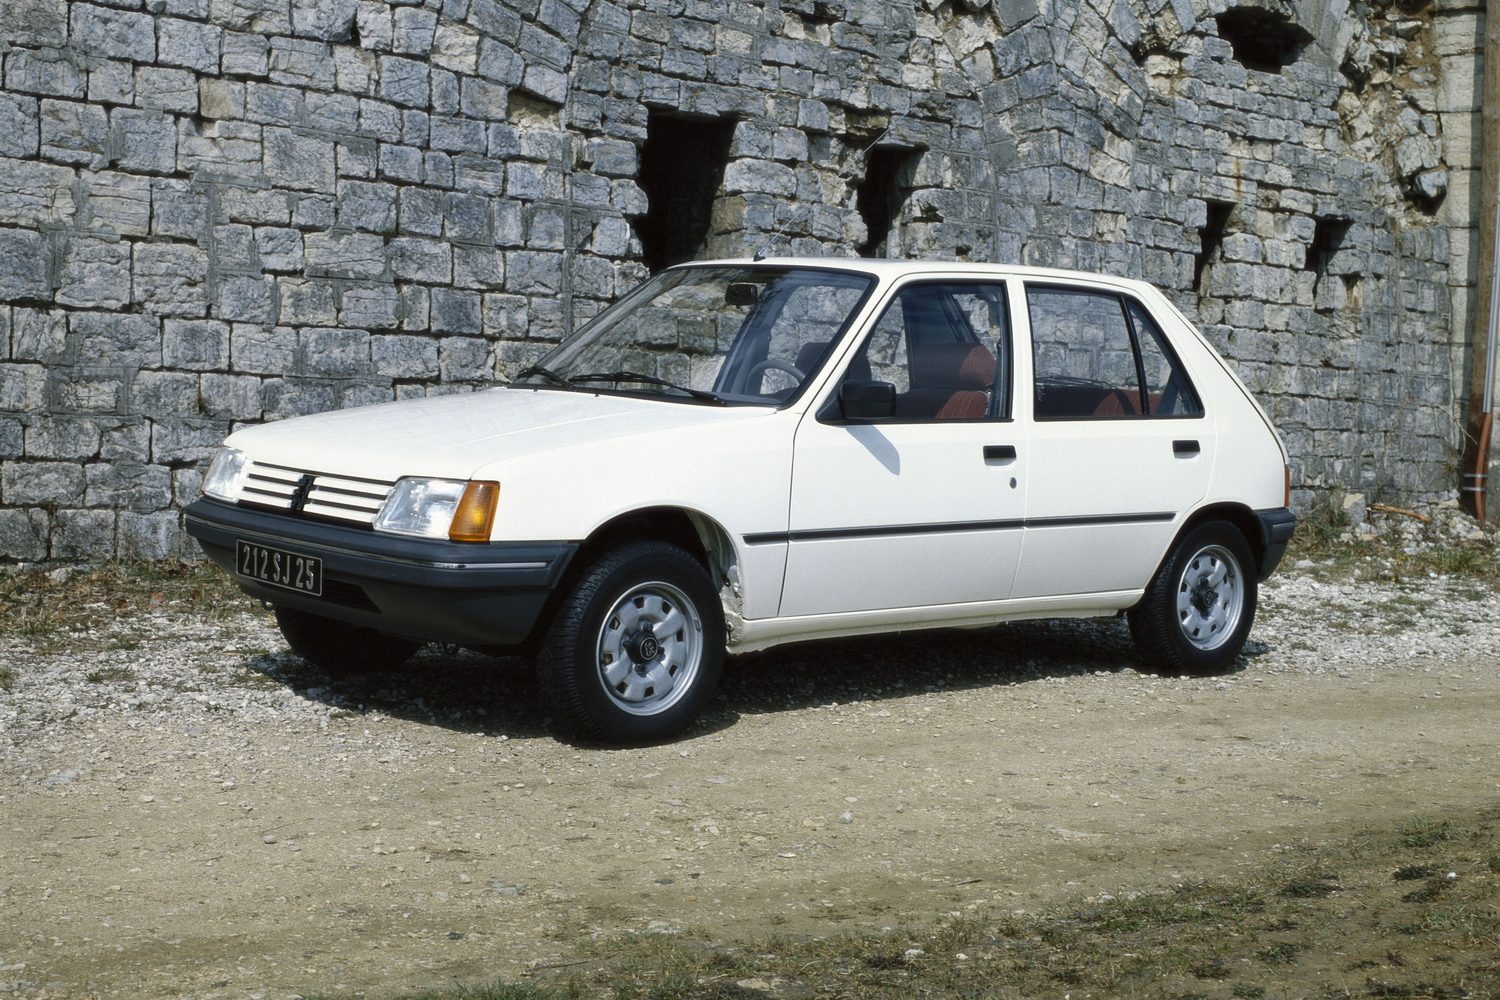 Complete Car Features | Happy birthday Peugeot 205!